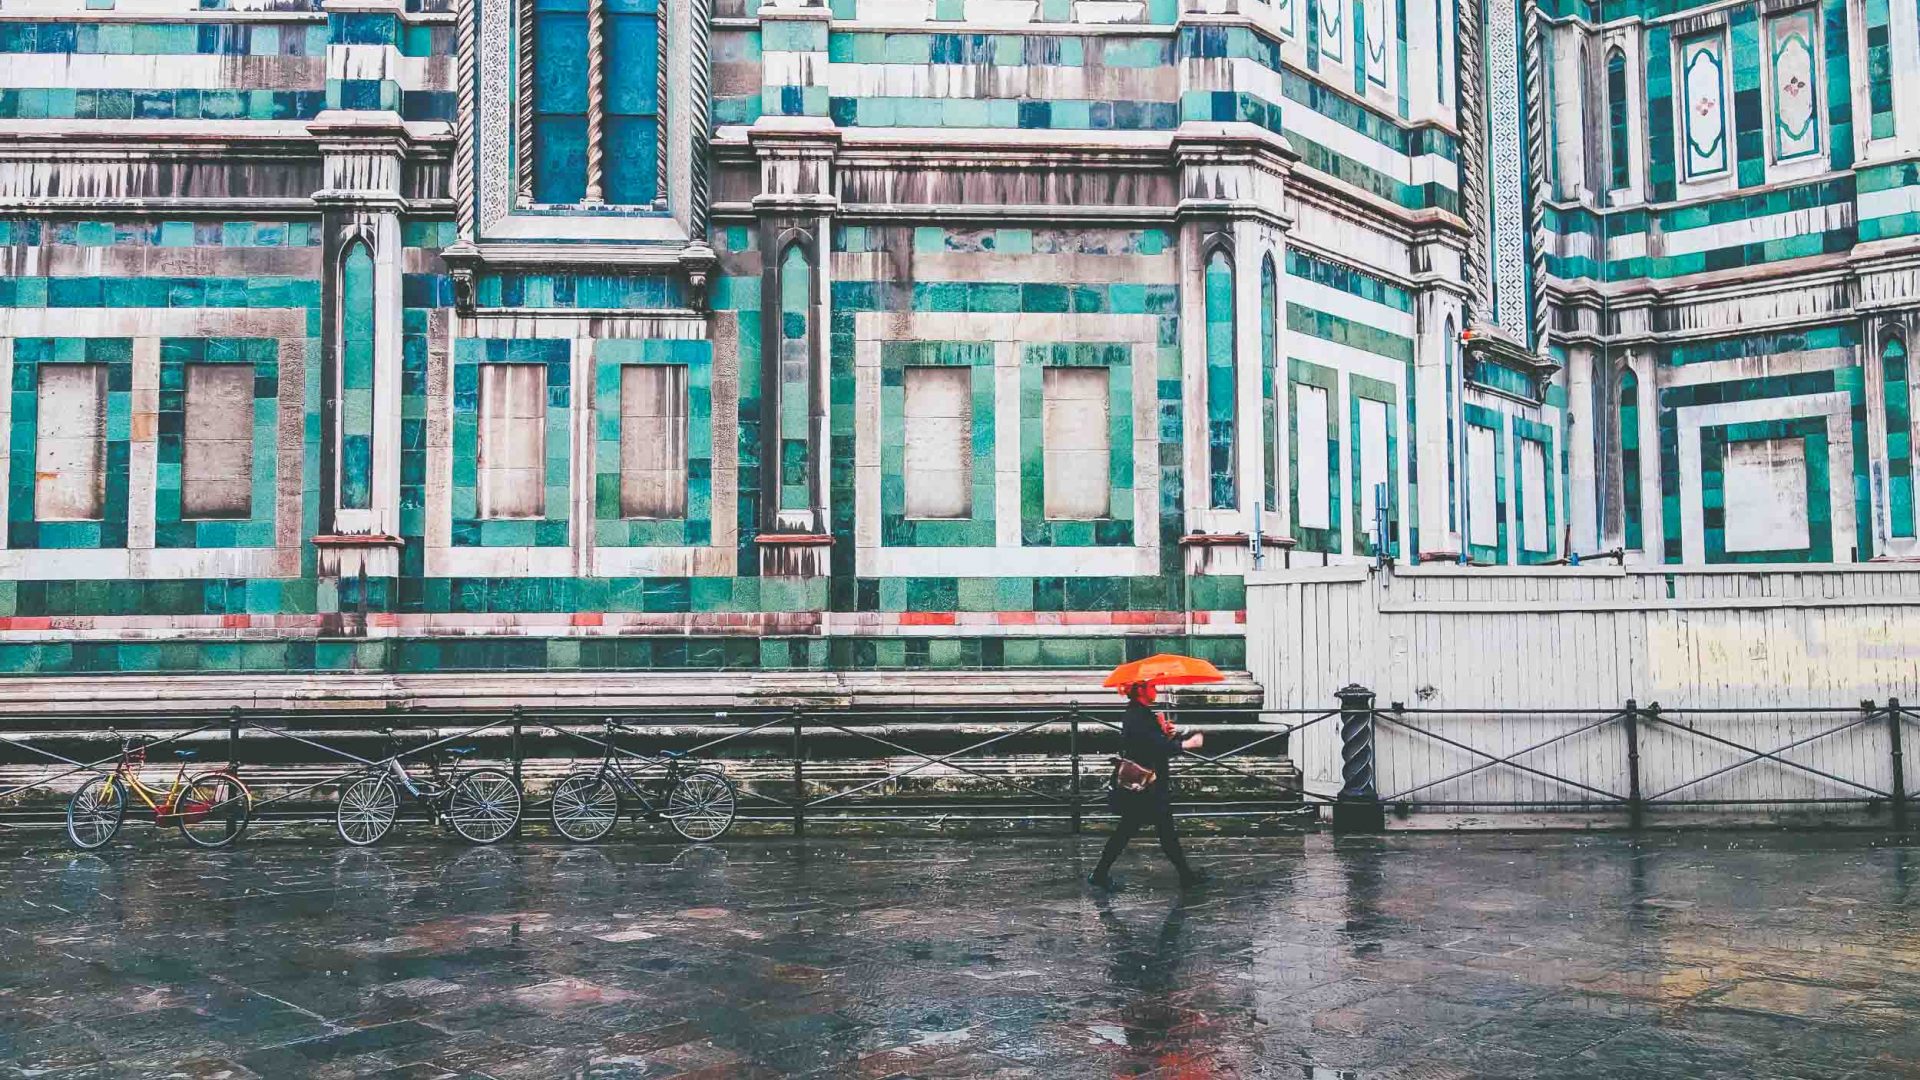 A person walks past the architecture in Florence, Italy.